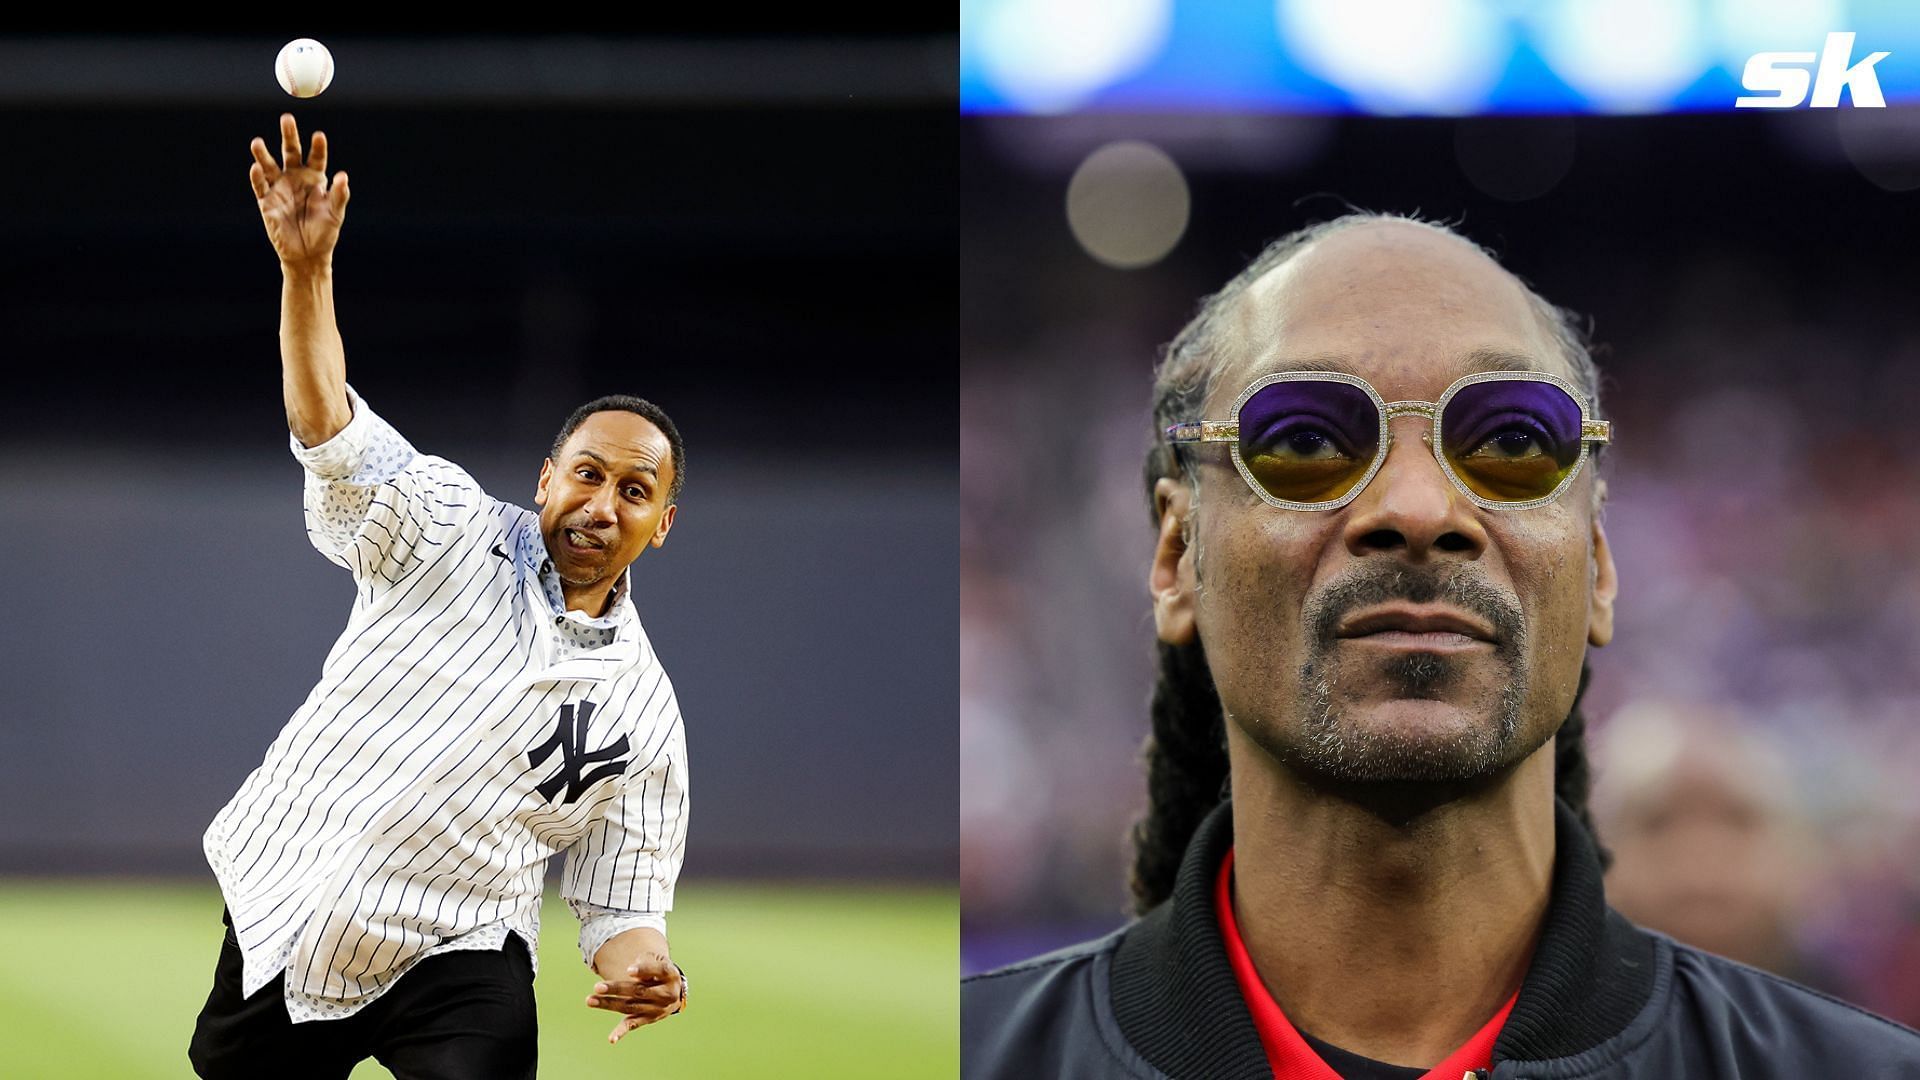 Snoop Dogg roasted Stephen A. Smith after the ESPN analyst tossed a first pitch at Yankee Stadium